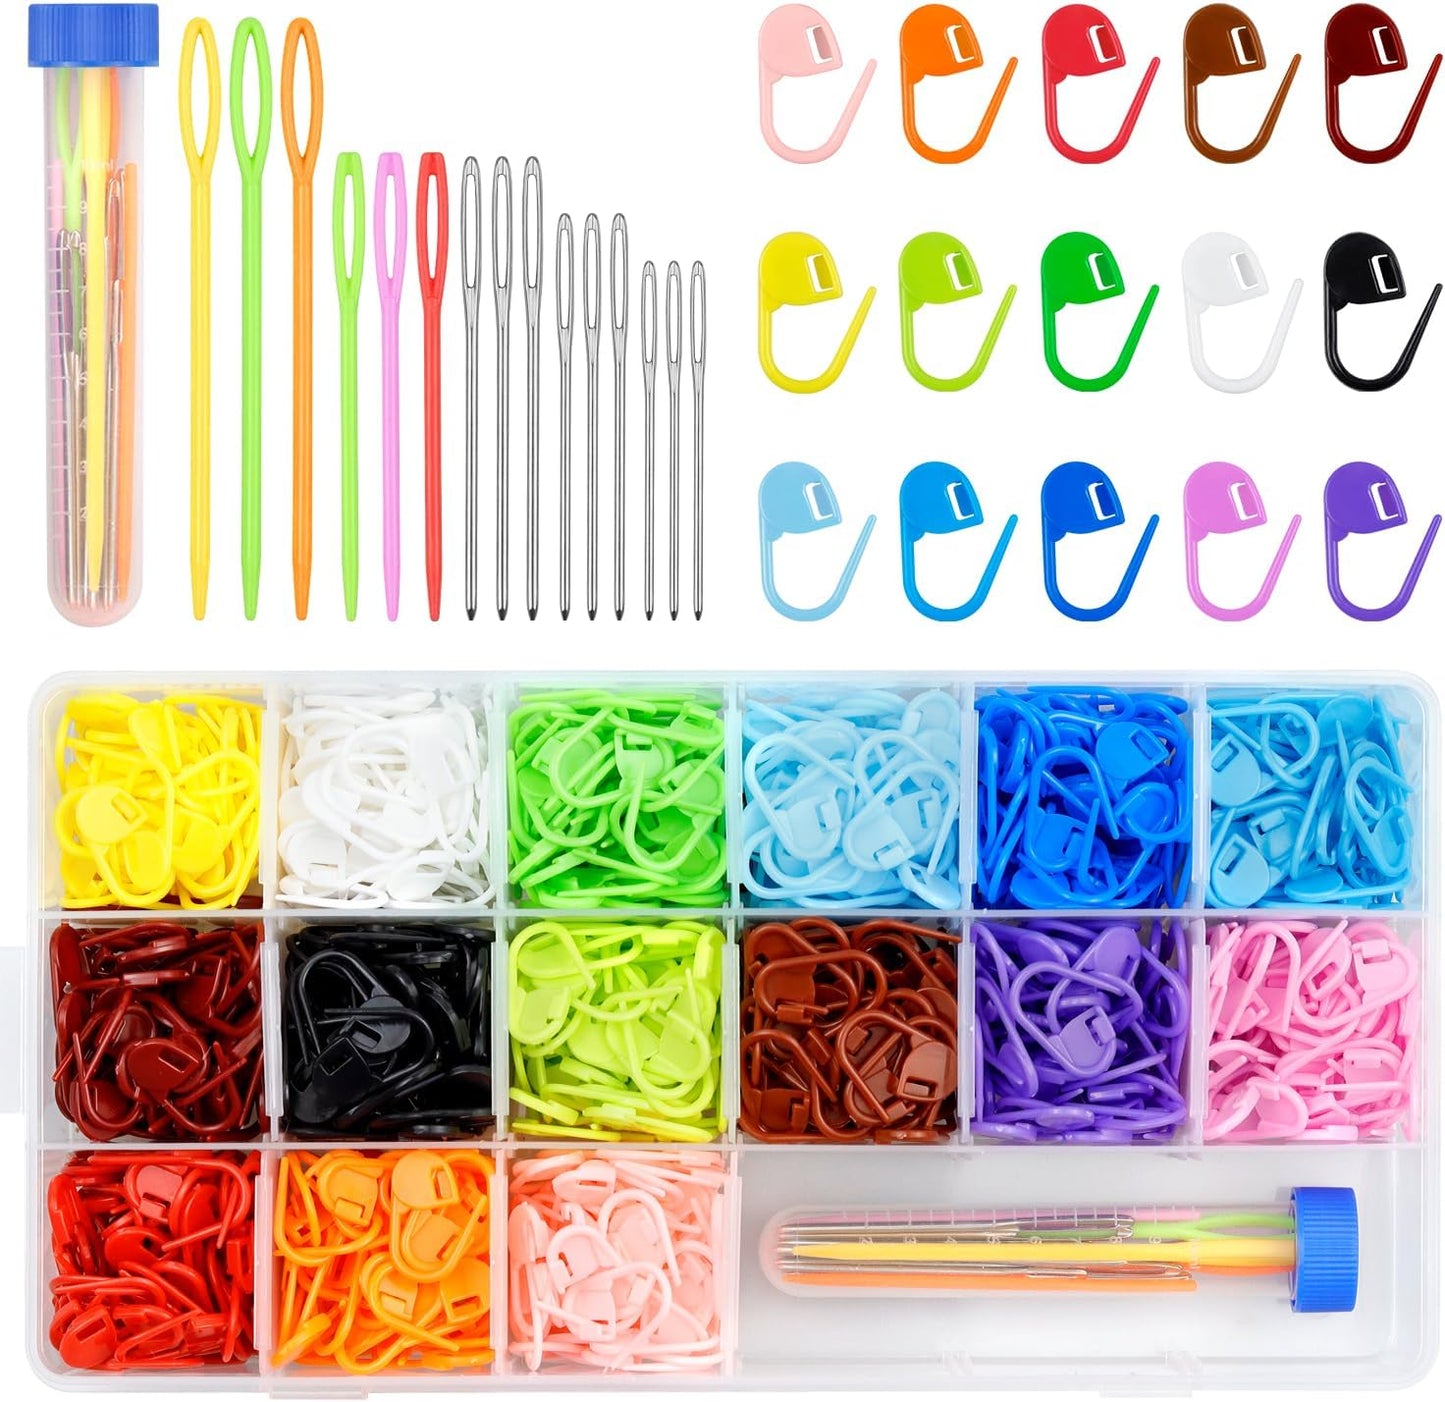 220/900 Pieces Stitch Markers,With 15 Pcs Large Eye Blunt Sewing Needles,Colorful Crochet Stitch Markers for Knitting Stitch Locking Clips Crochet Pins with Storage Box